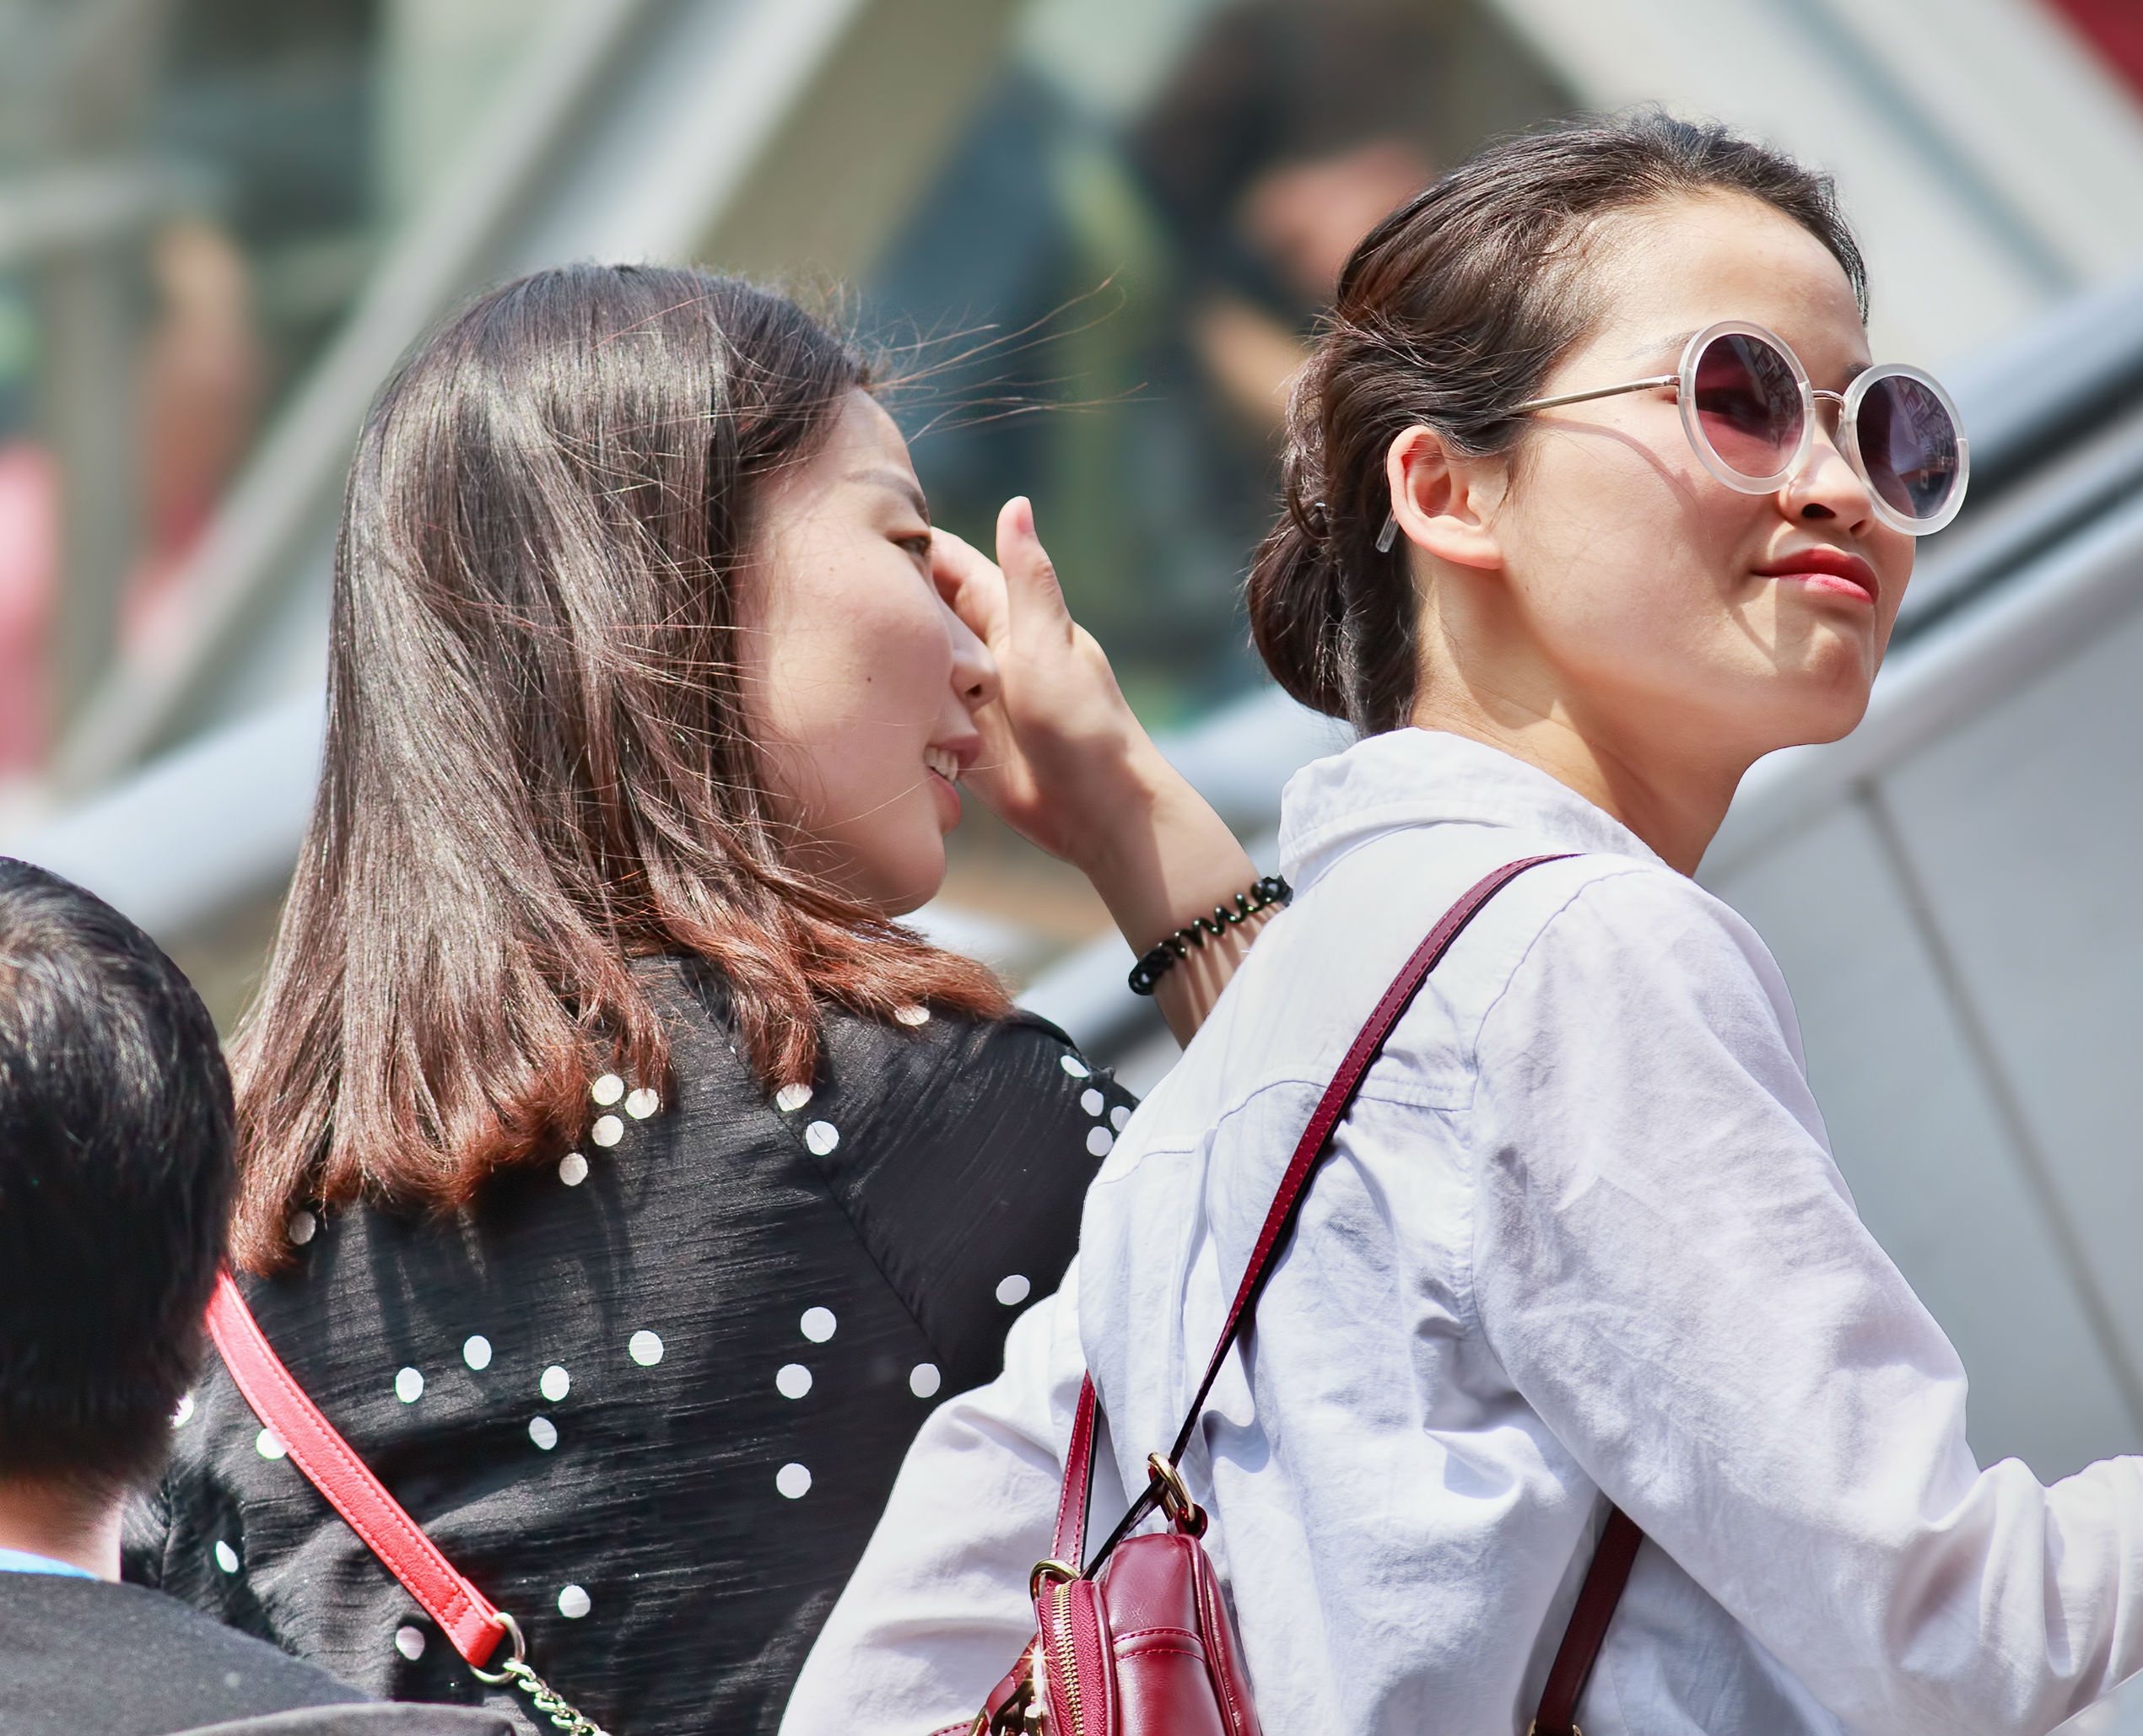 Around half of Chinese travelers research where they want to shop abroad before they leave on their trip. (Shutterstock)